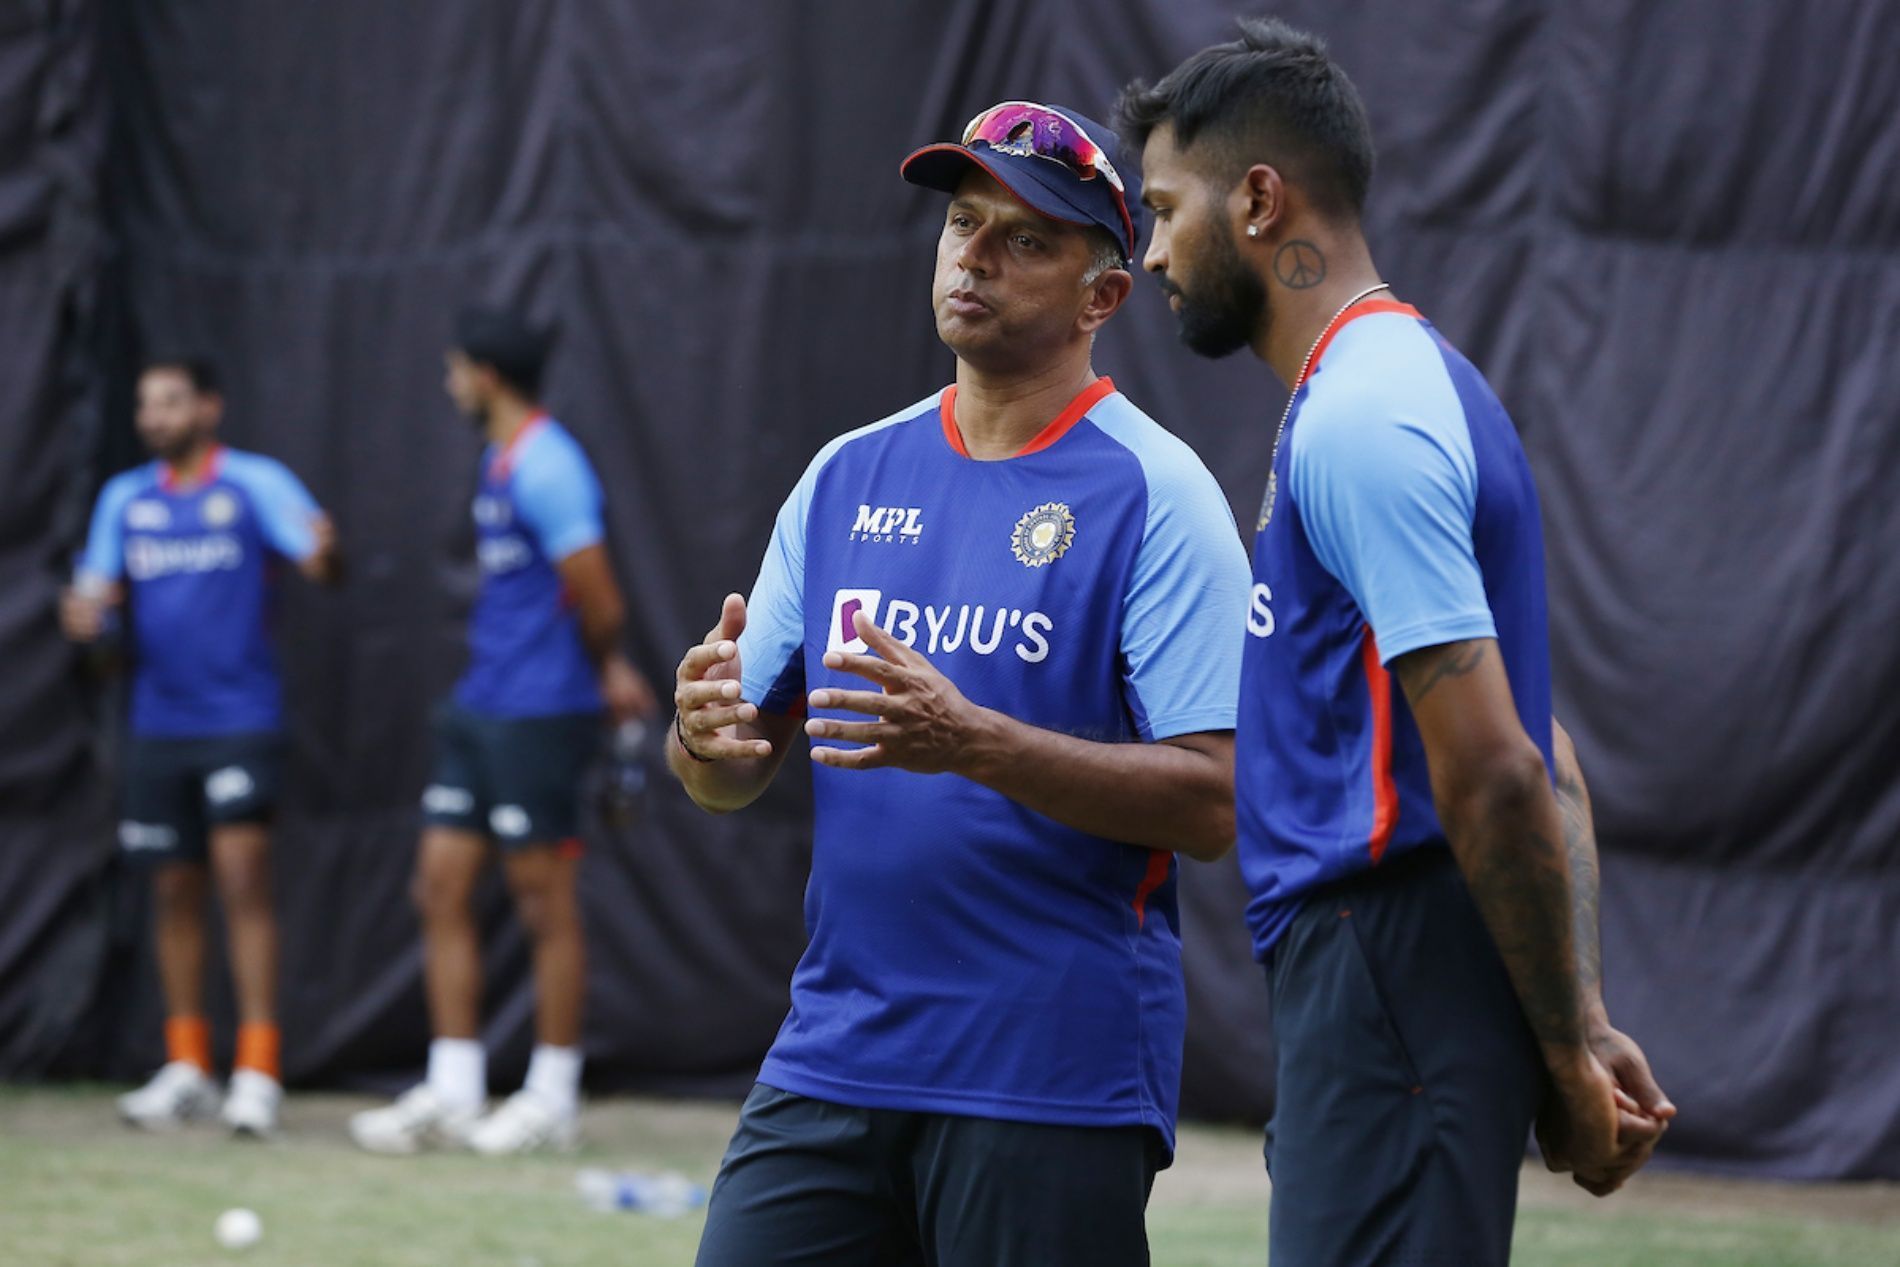 Rahul Dravid will have a slightly inexperienced side at his disposal in the T20I series vs SA [P/C: BCCI]